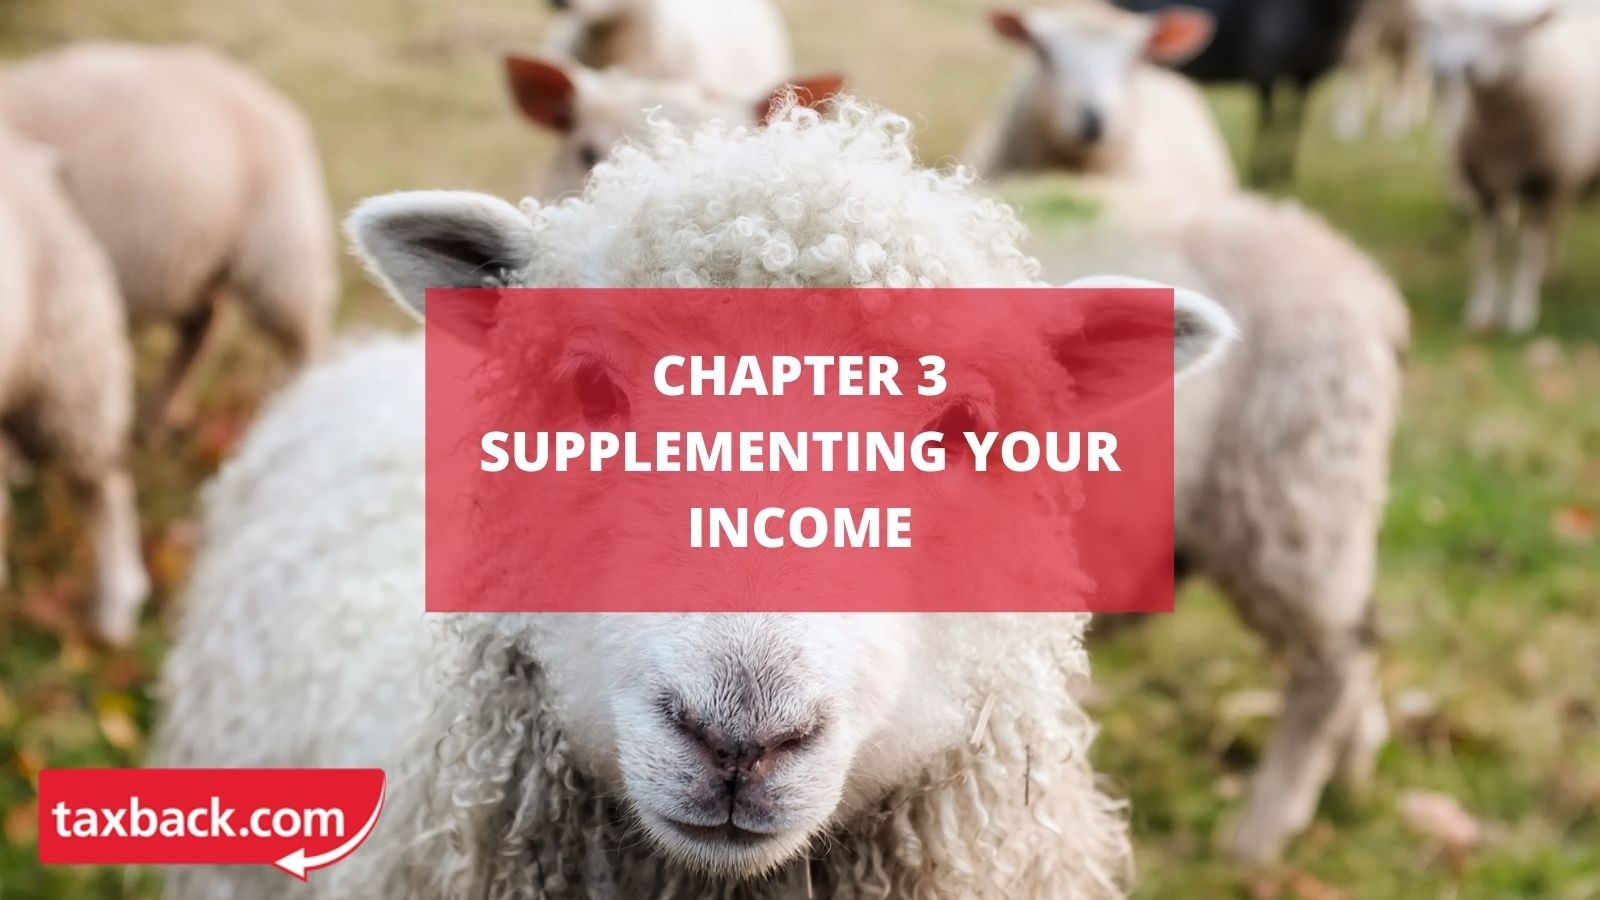 Chapter 3 - Supplementing your income